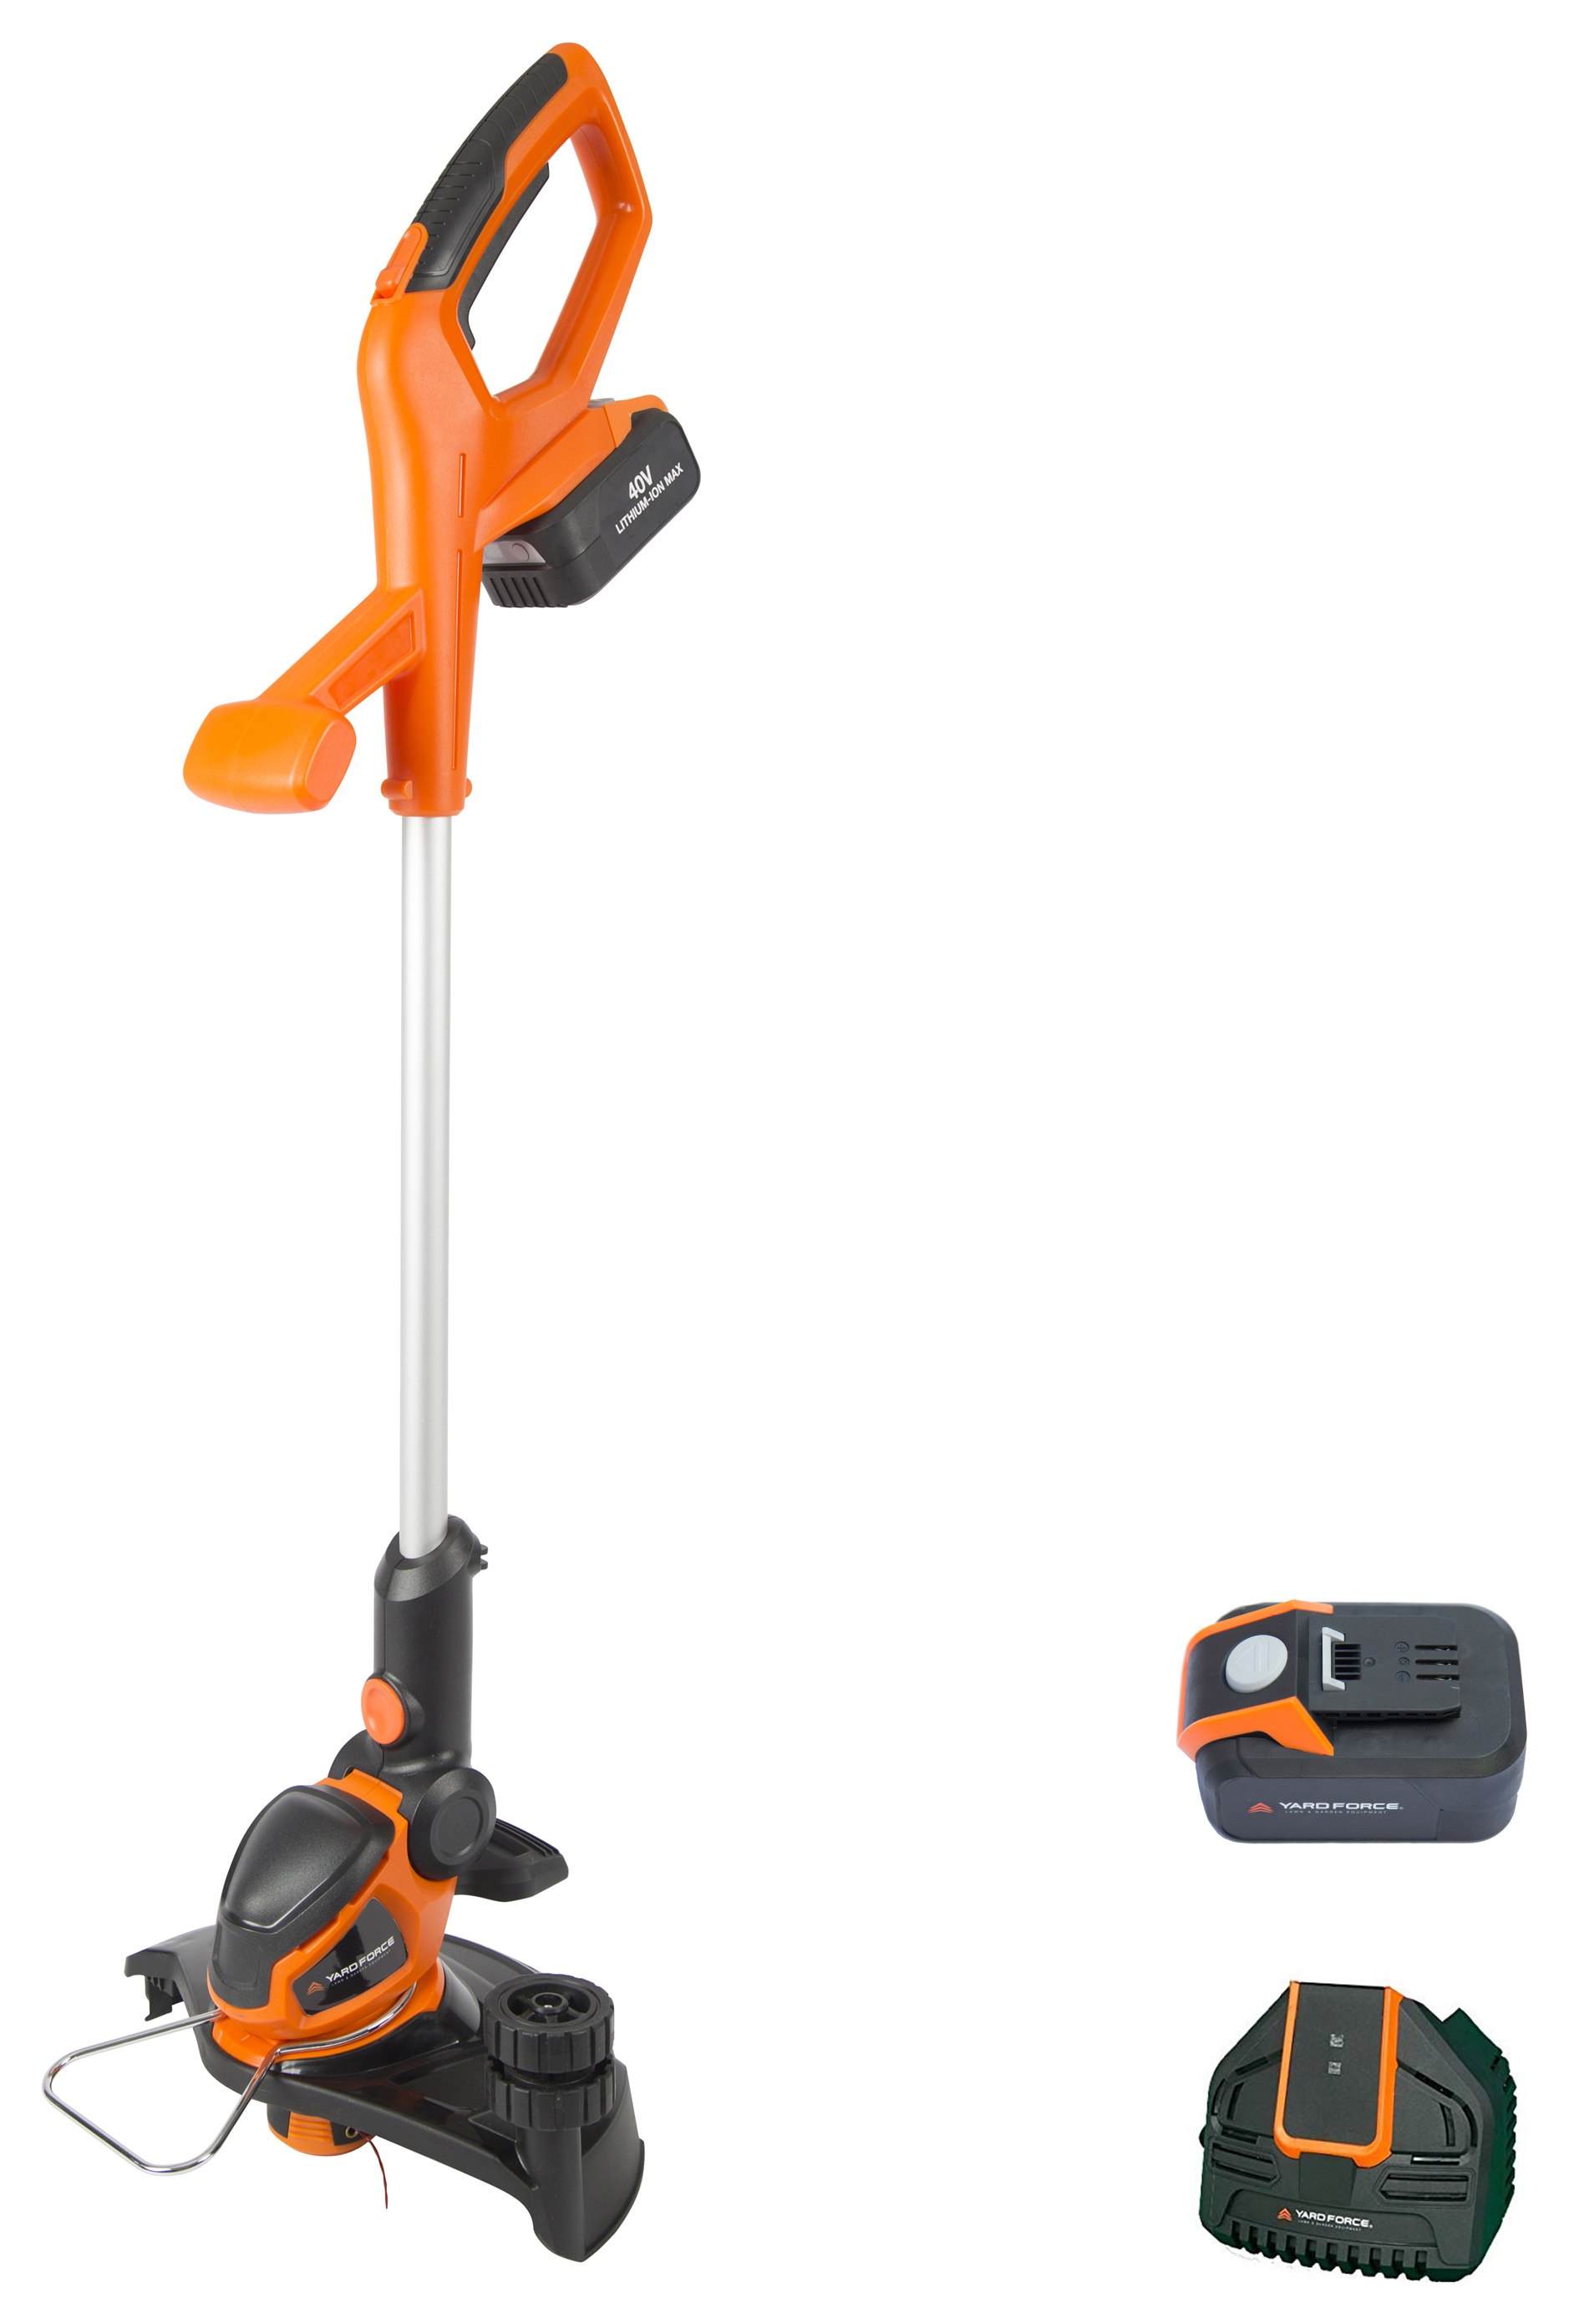 Image of Yard Force LT G30 40V 30cm Cordless Grass Trimmer with 2.5Ah Li-ion Battery & Charger